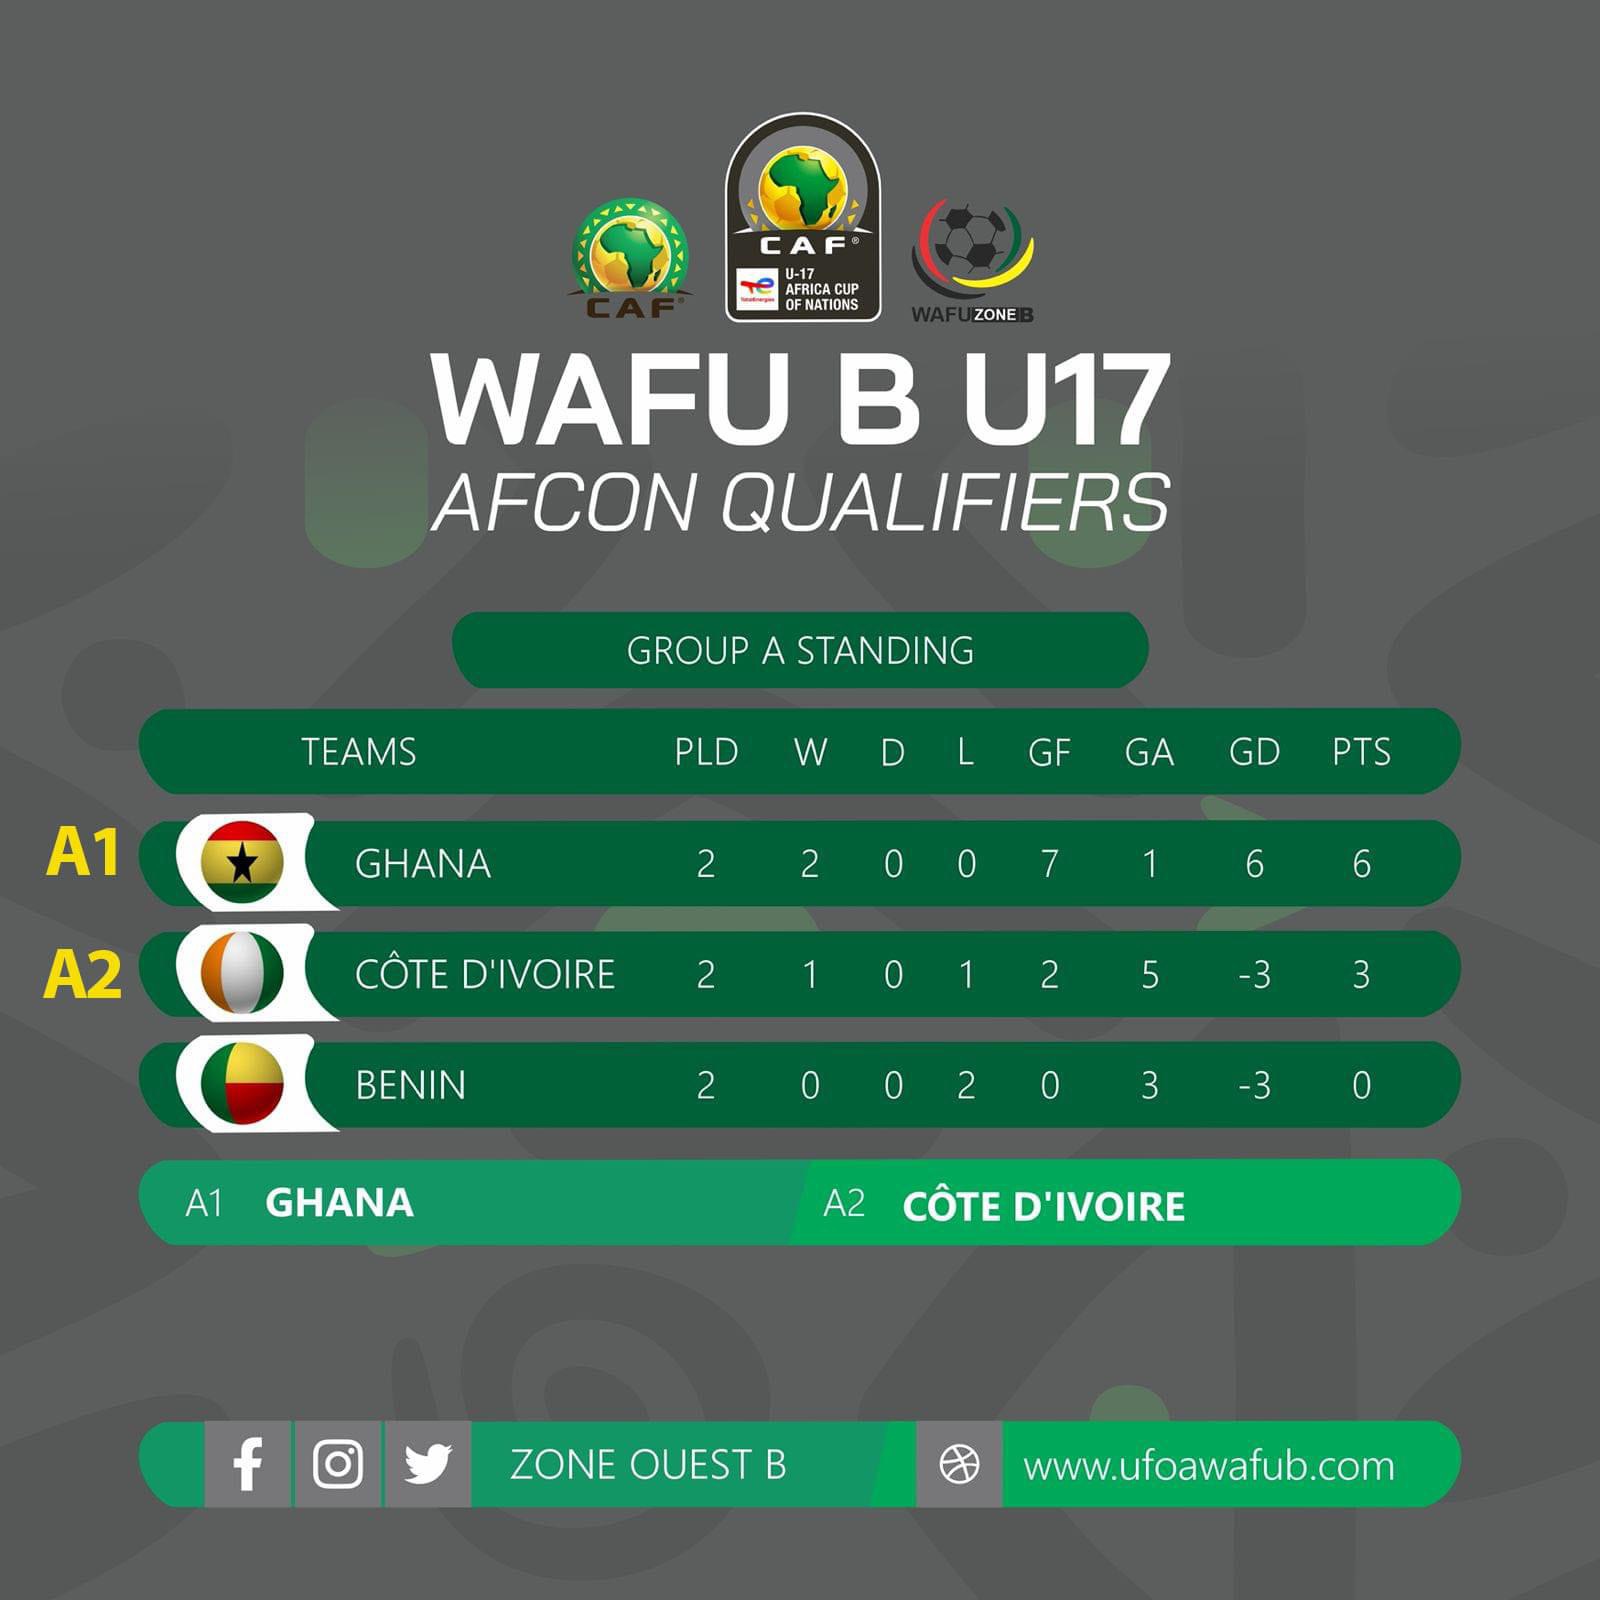 Ghana tops Group A after convincing 2-0 win over Benin